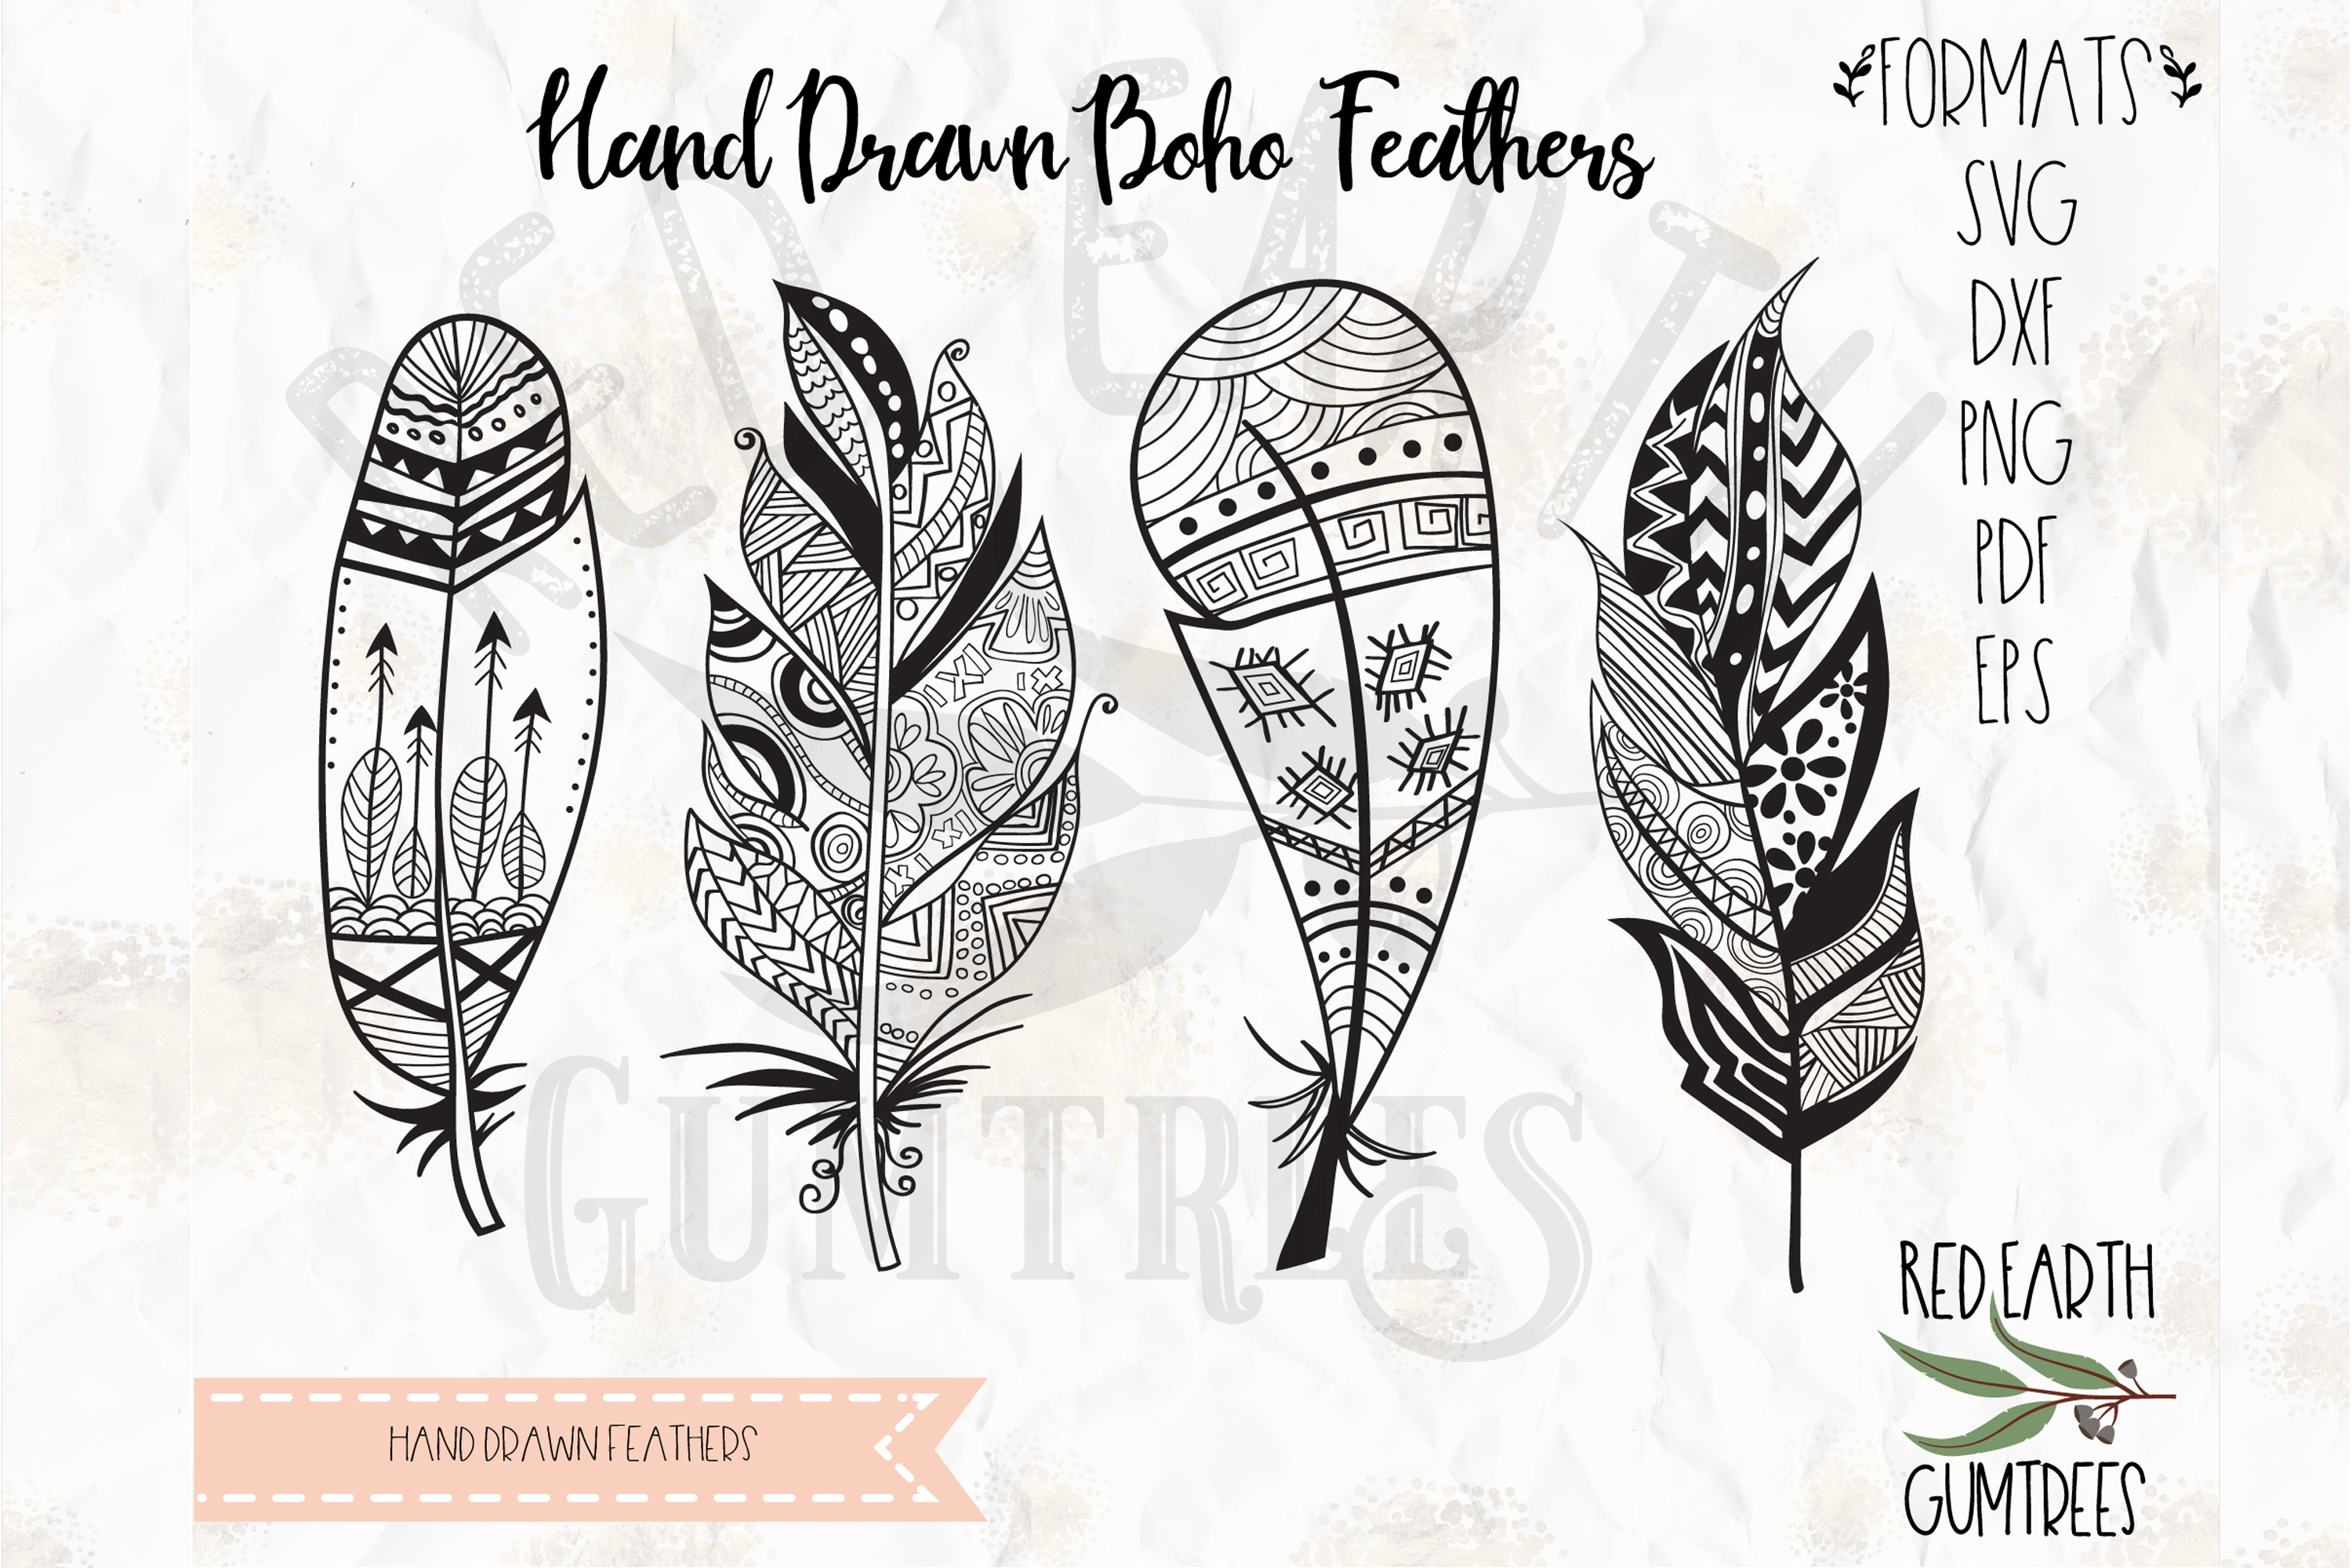 Download Boho feathers bundle, Tribal feathers in SVG,DXF,PNG, EPS